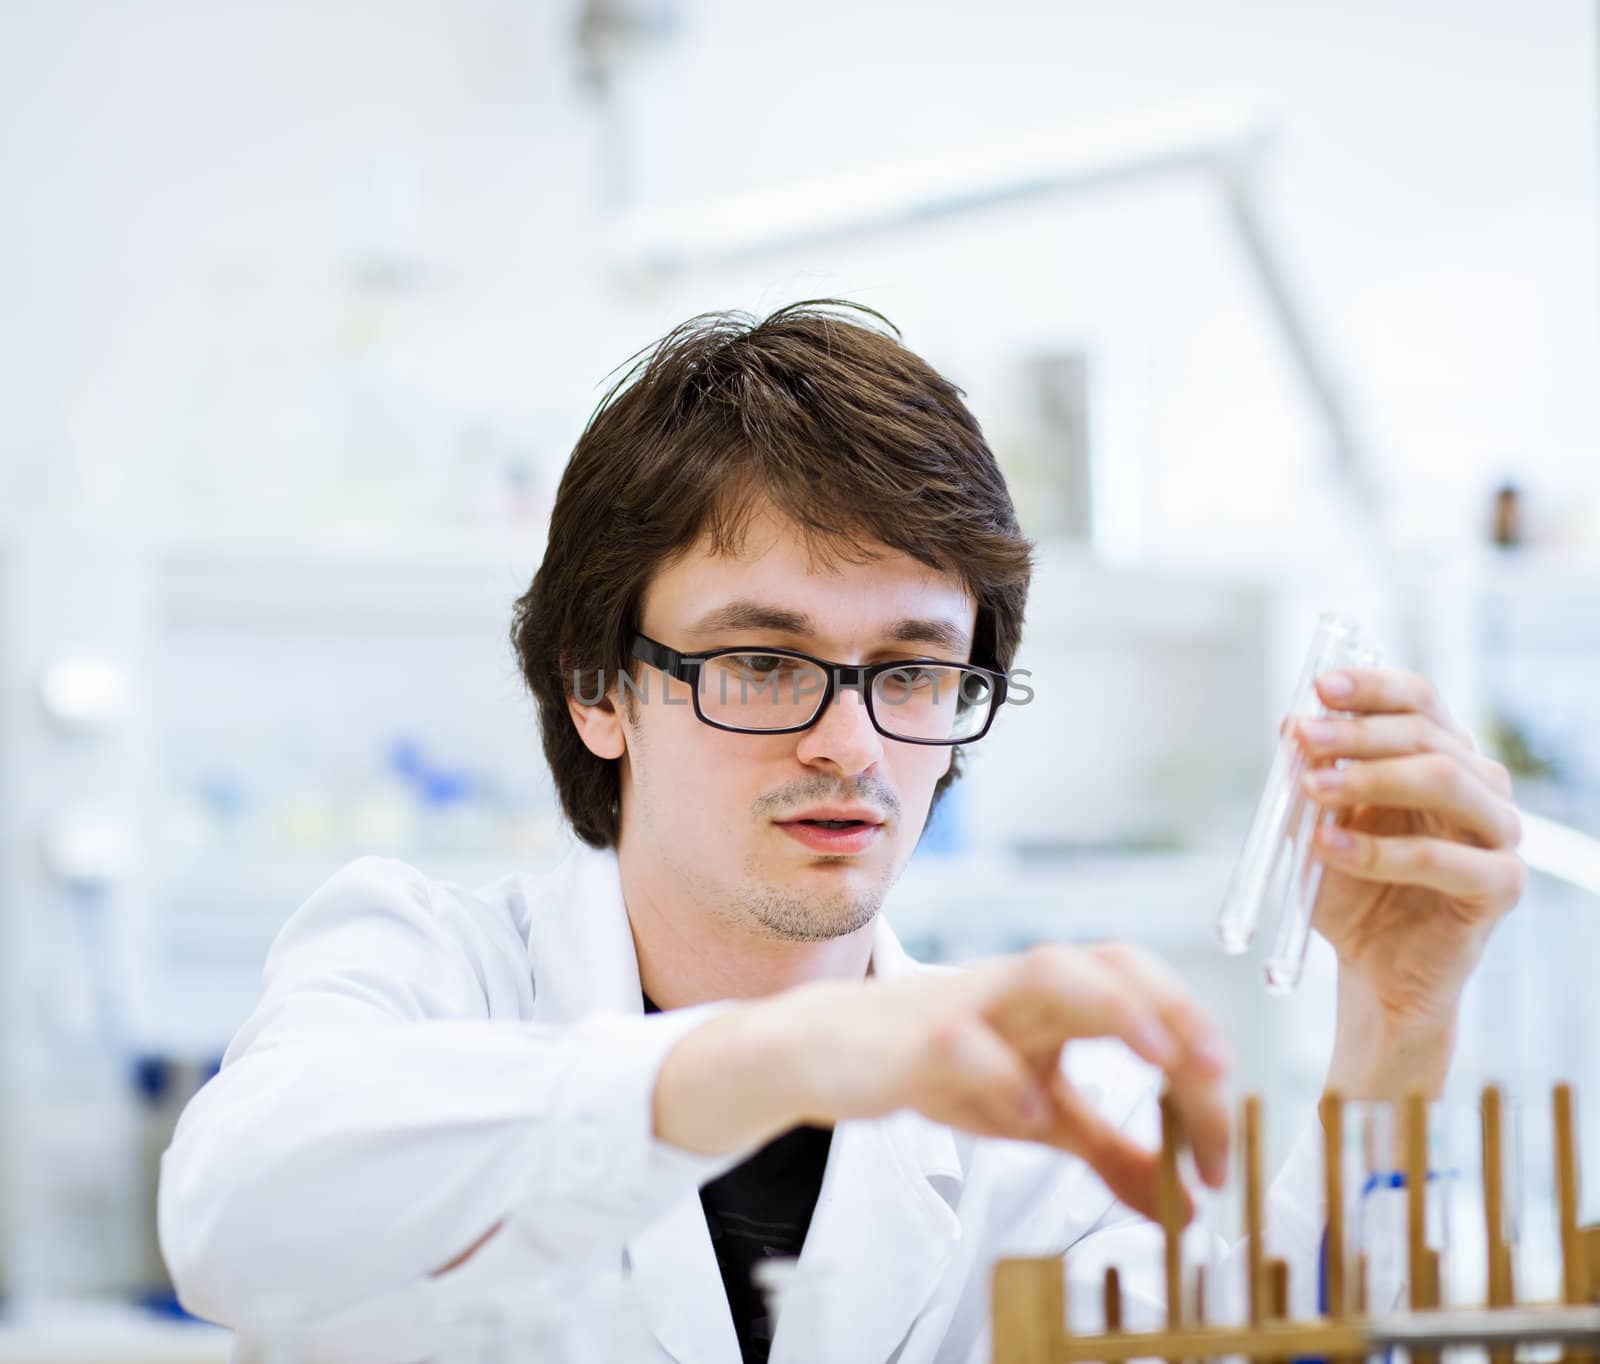 young, male researcher/chemistry student by viktor_cap